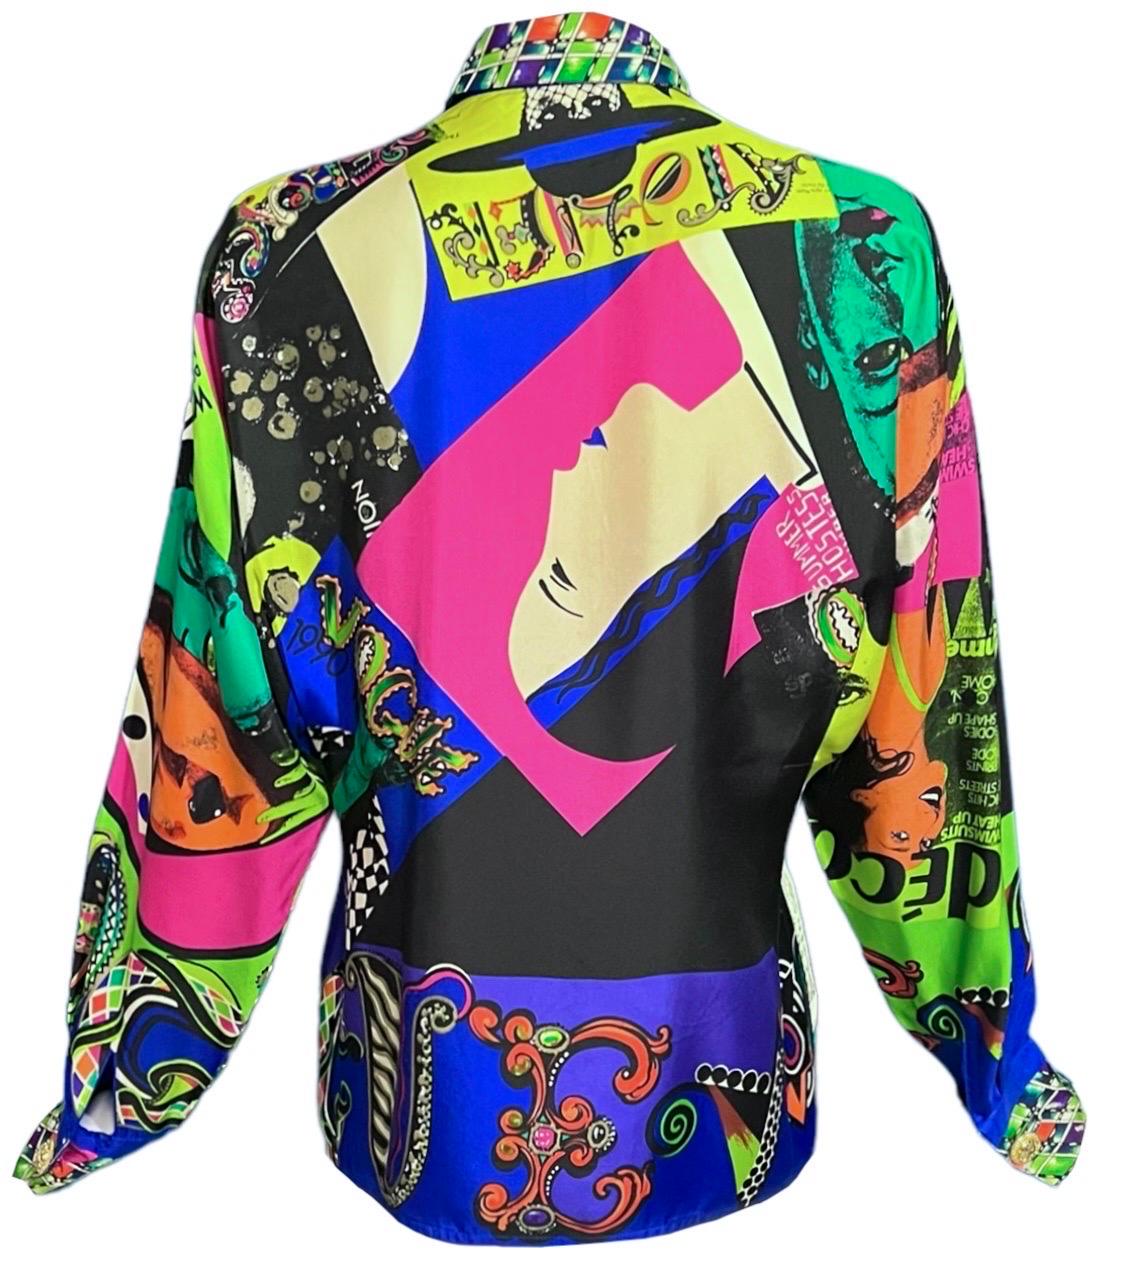 S/S 1991 Gianni Versace Vogue Pop Art Printed Silk Shirt In Good Condition For Sale In Concord, NC